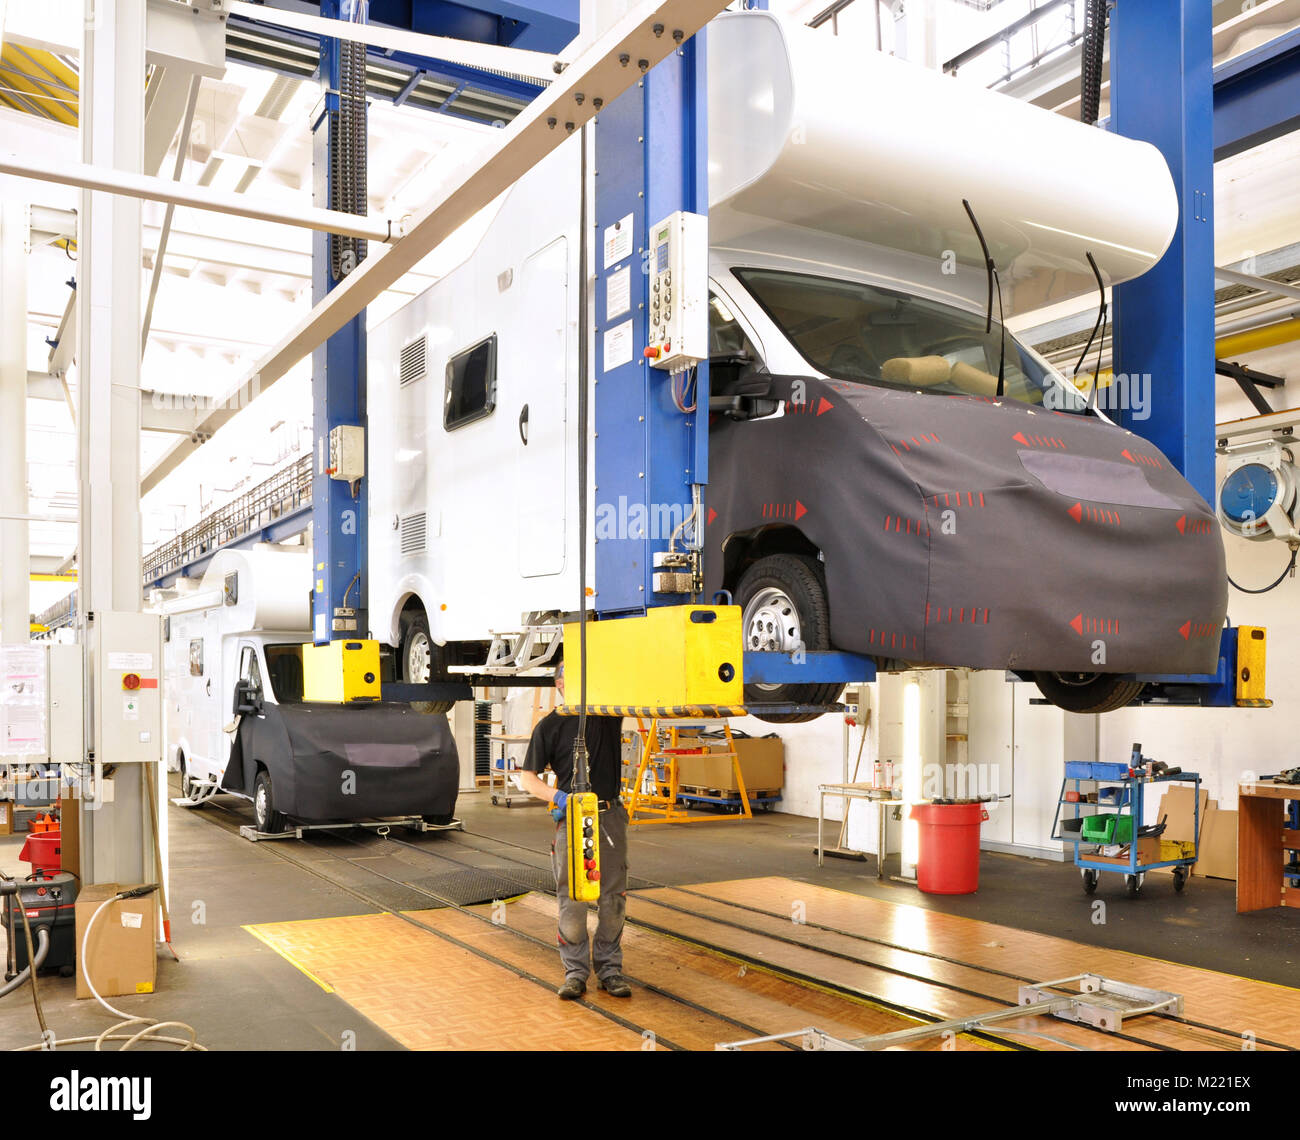 manufacture of camper vans in a factory Stock Photo